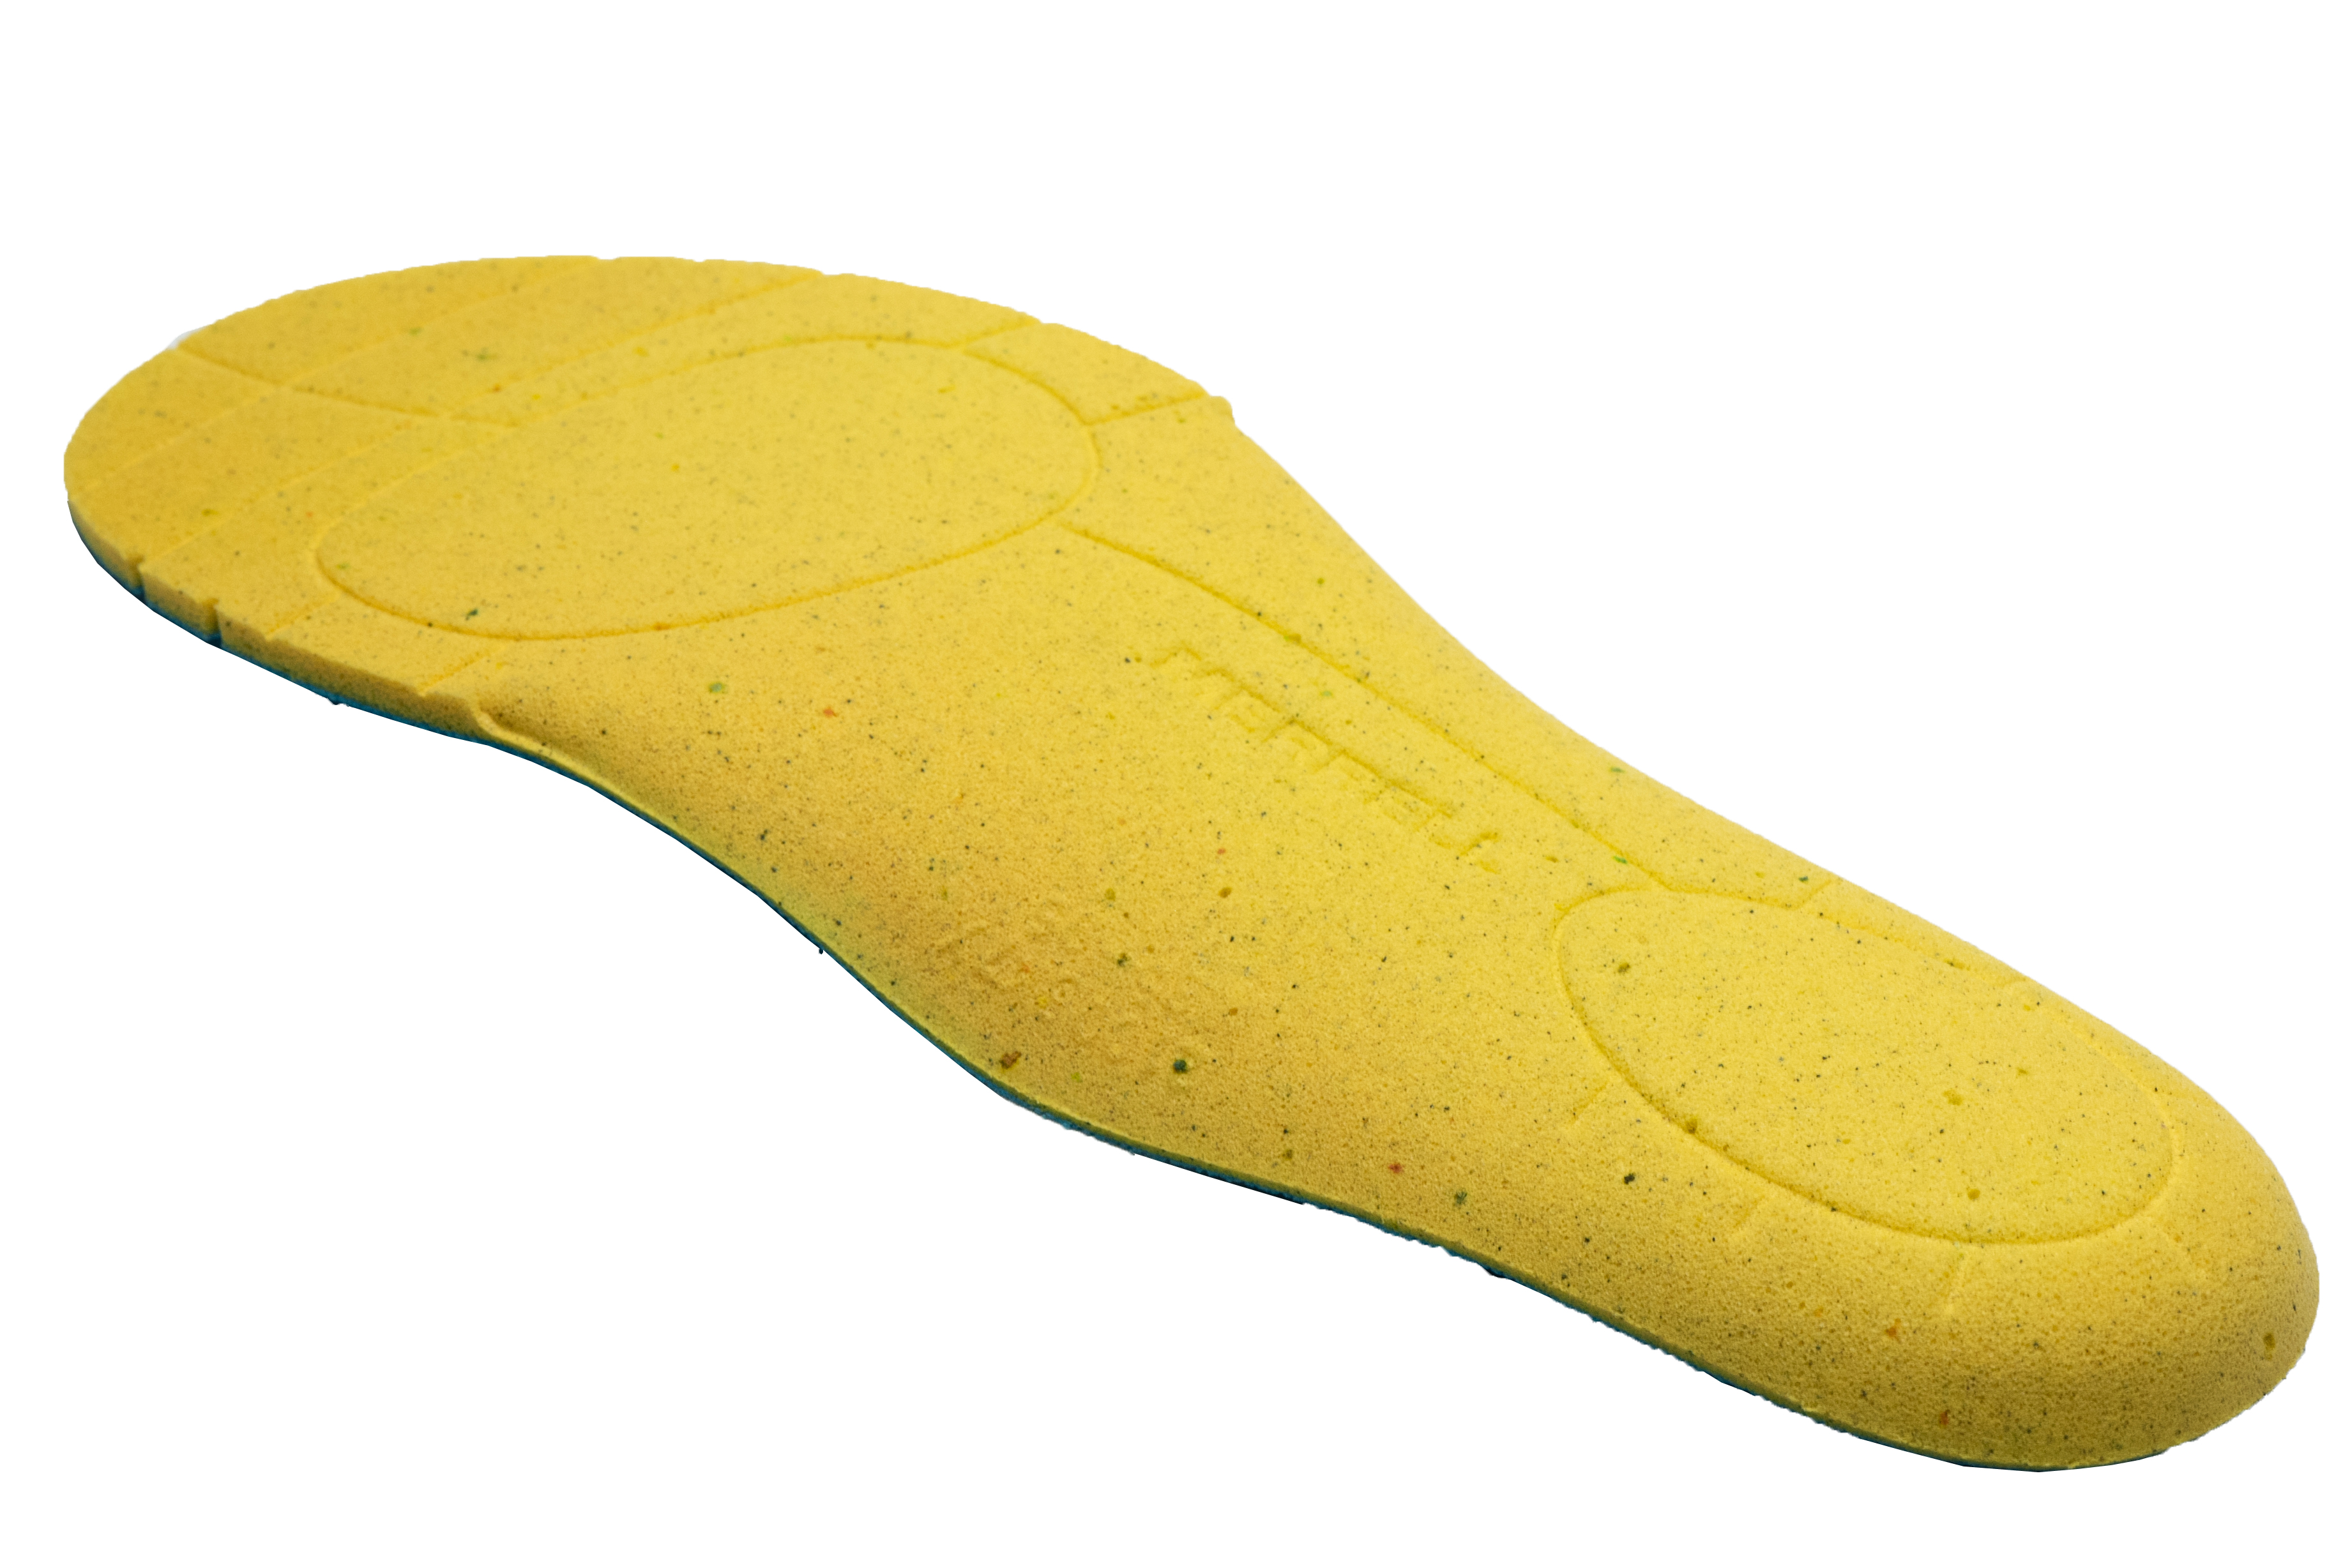 New Bio-Based with Seaweed Added Insole